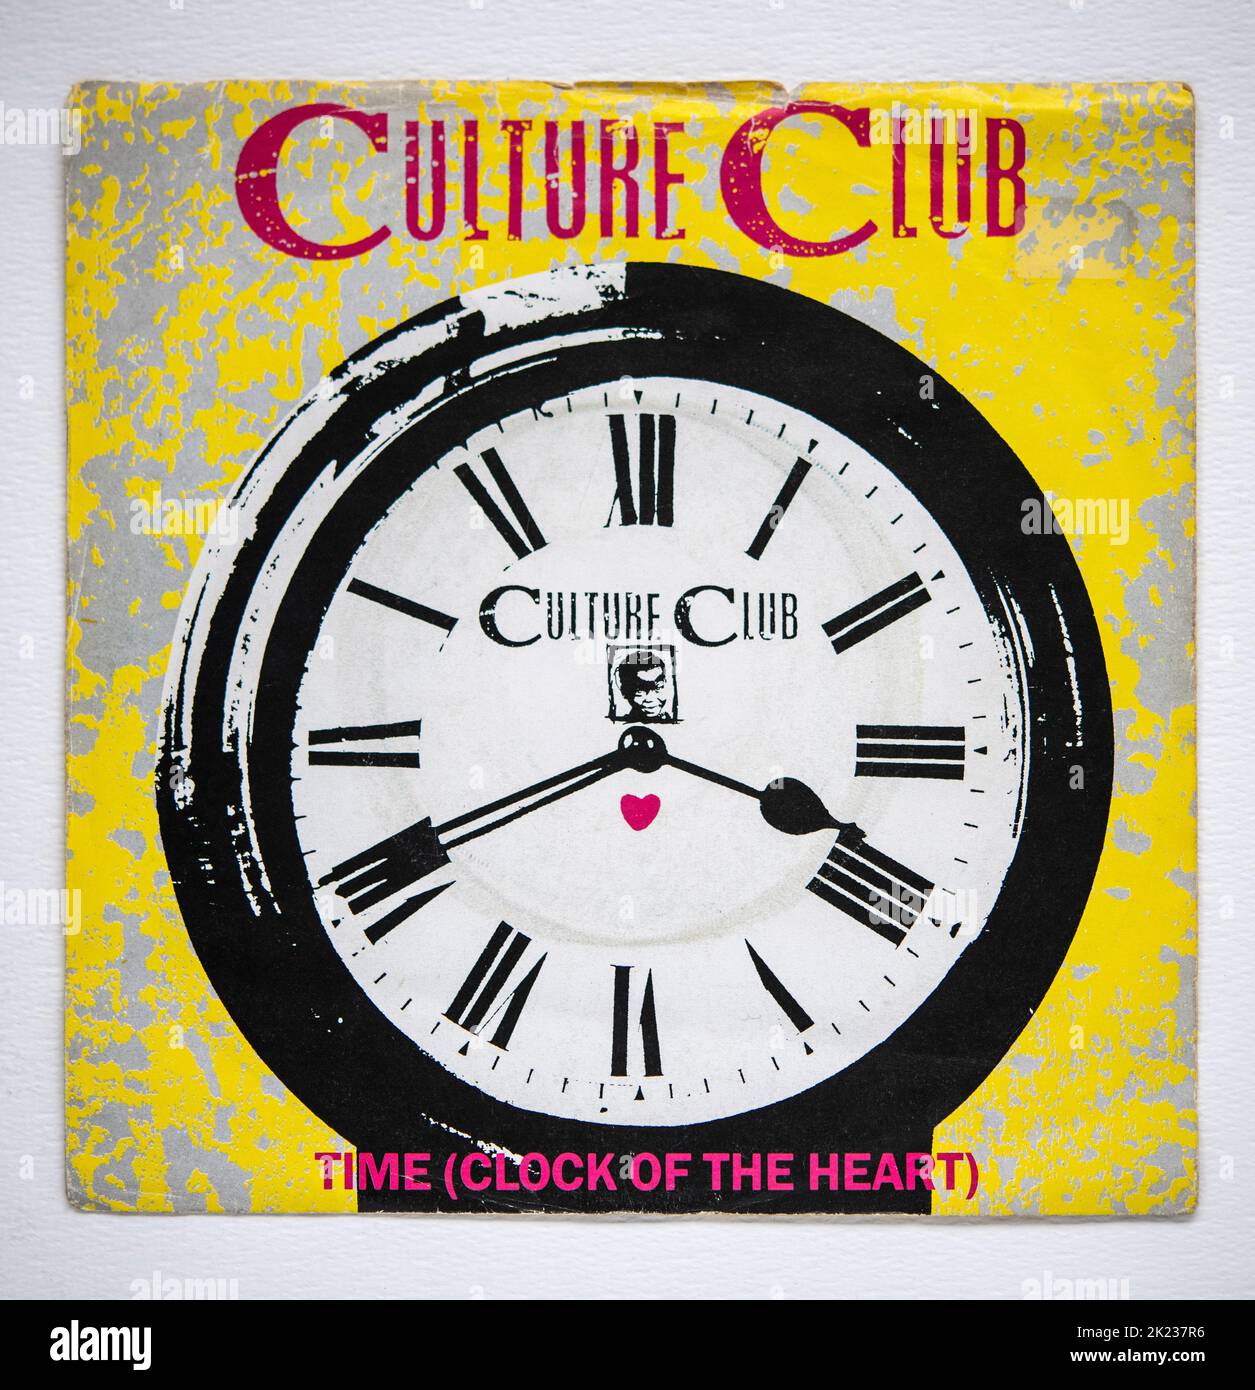 Picture cover of the seven inch single version of Time (Clock of the Heart) by Culture Club, which was released in 1982. Stock Photo